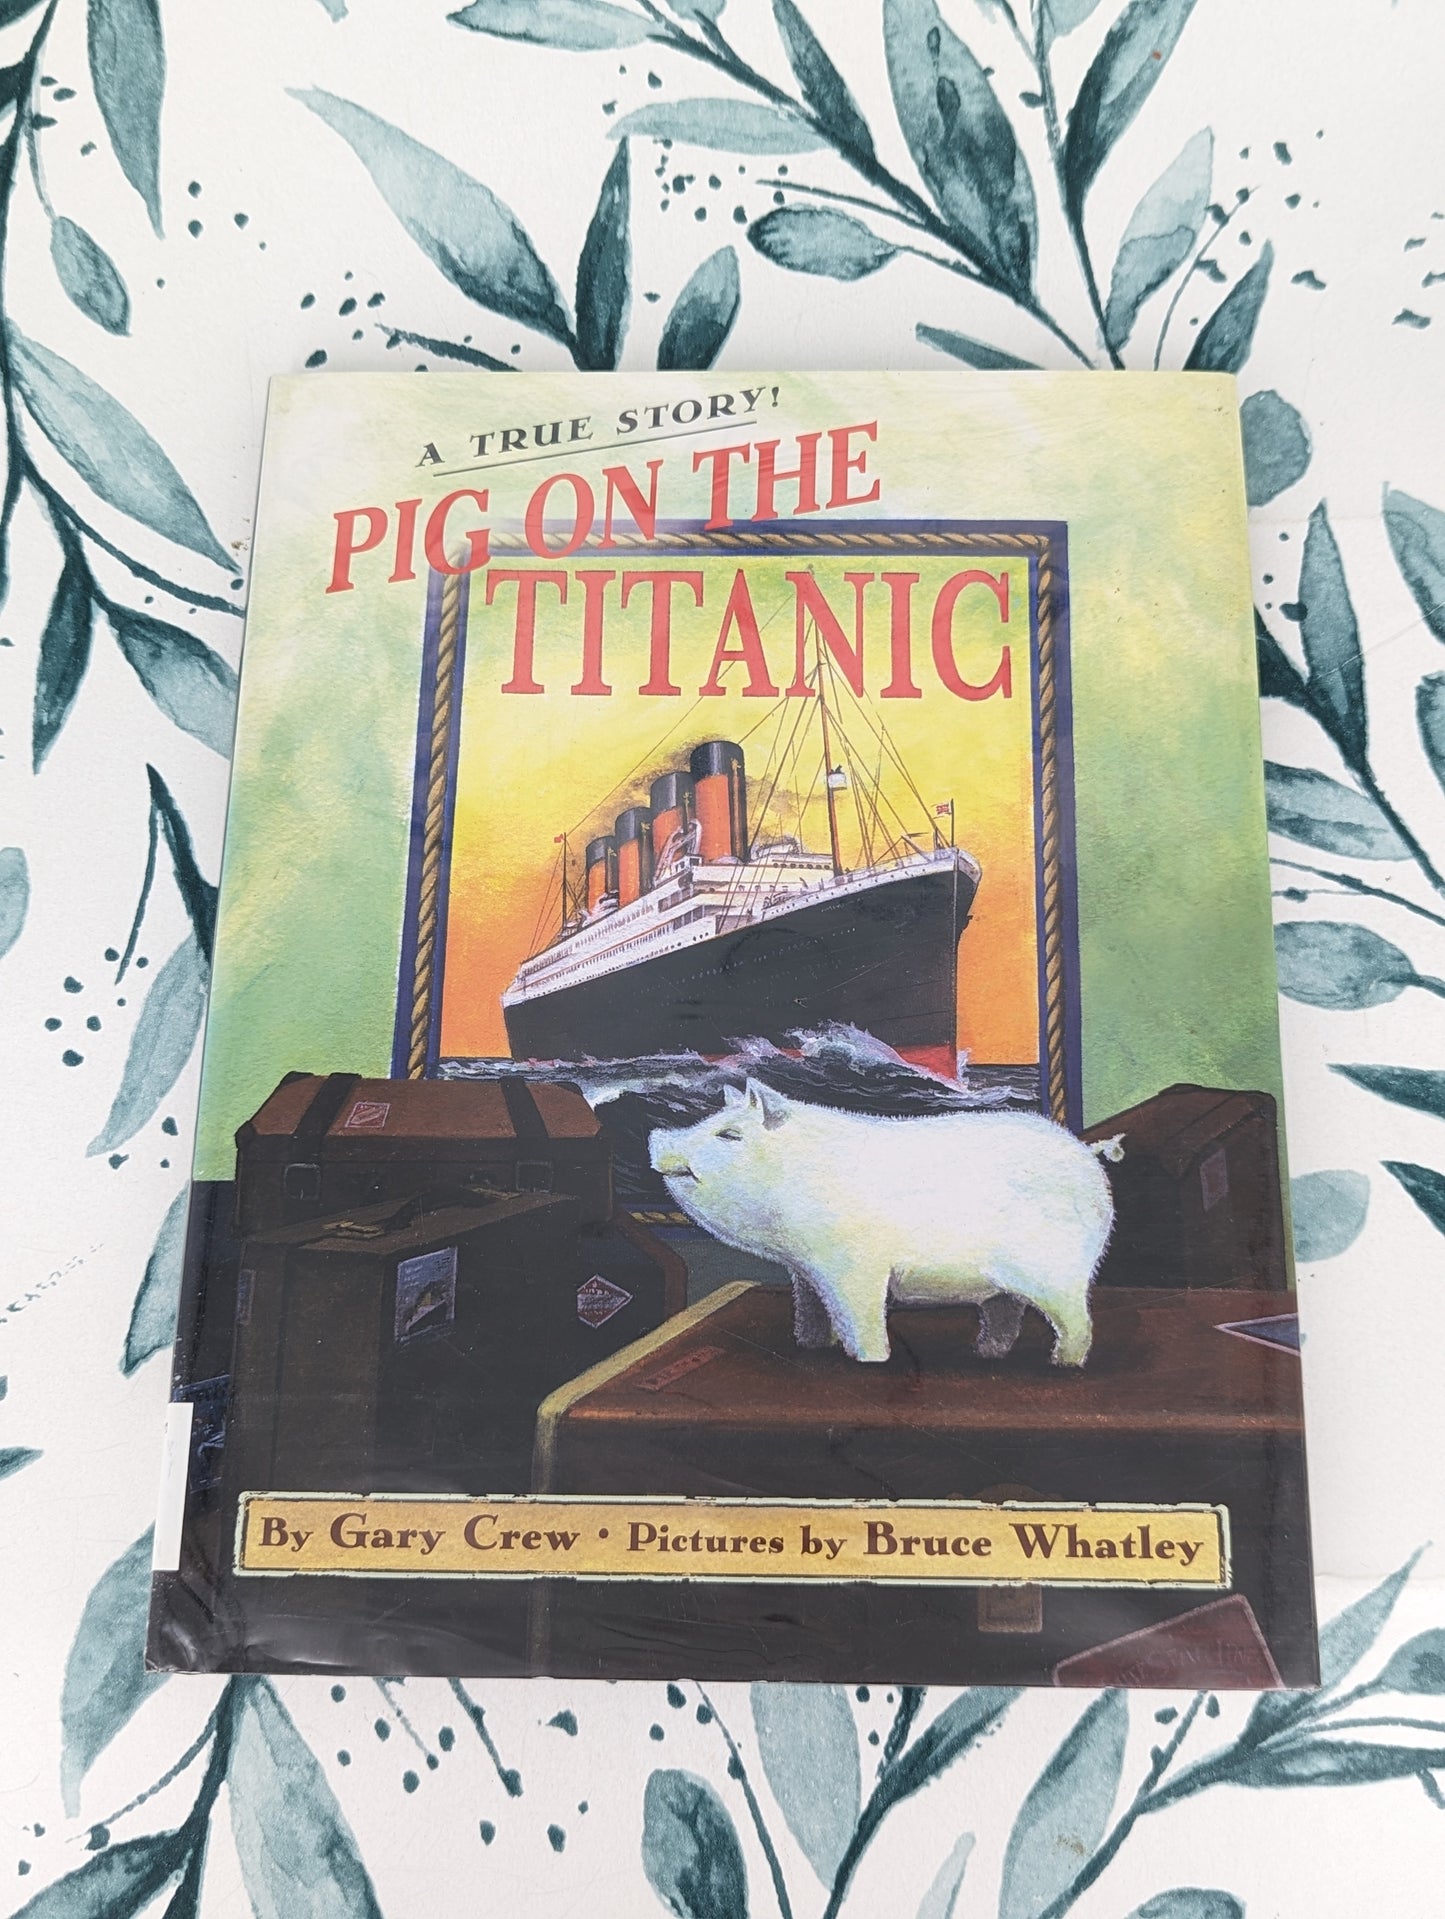 Pig on the Titanic: A True Story